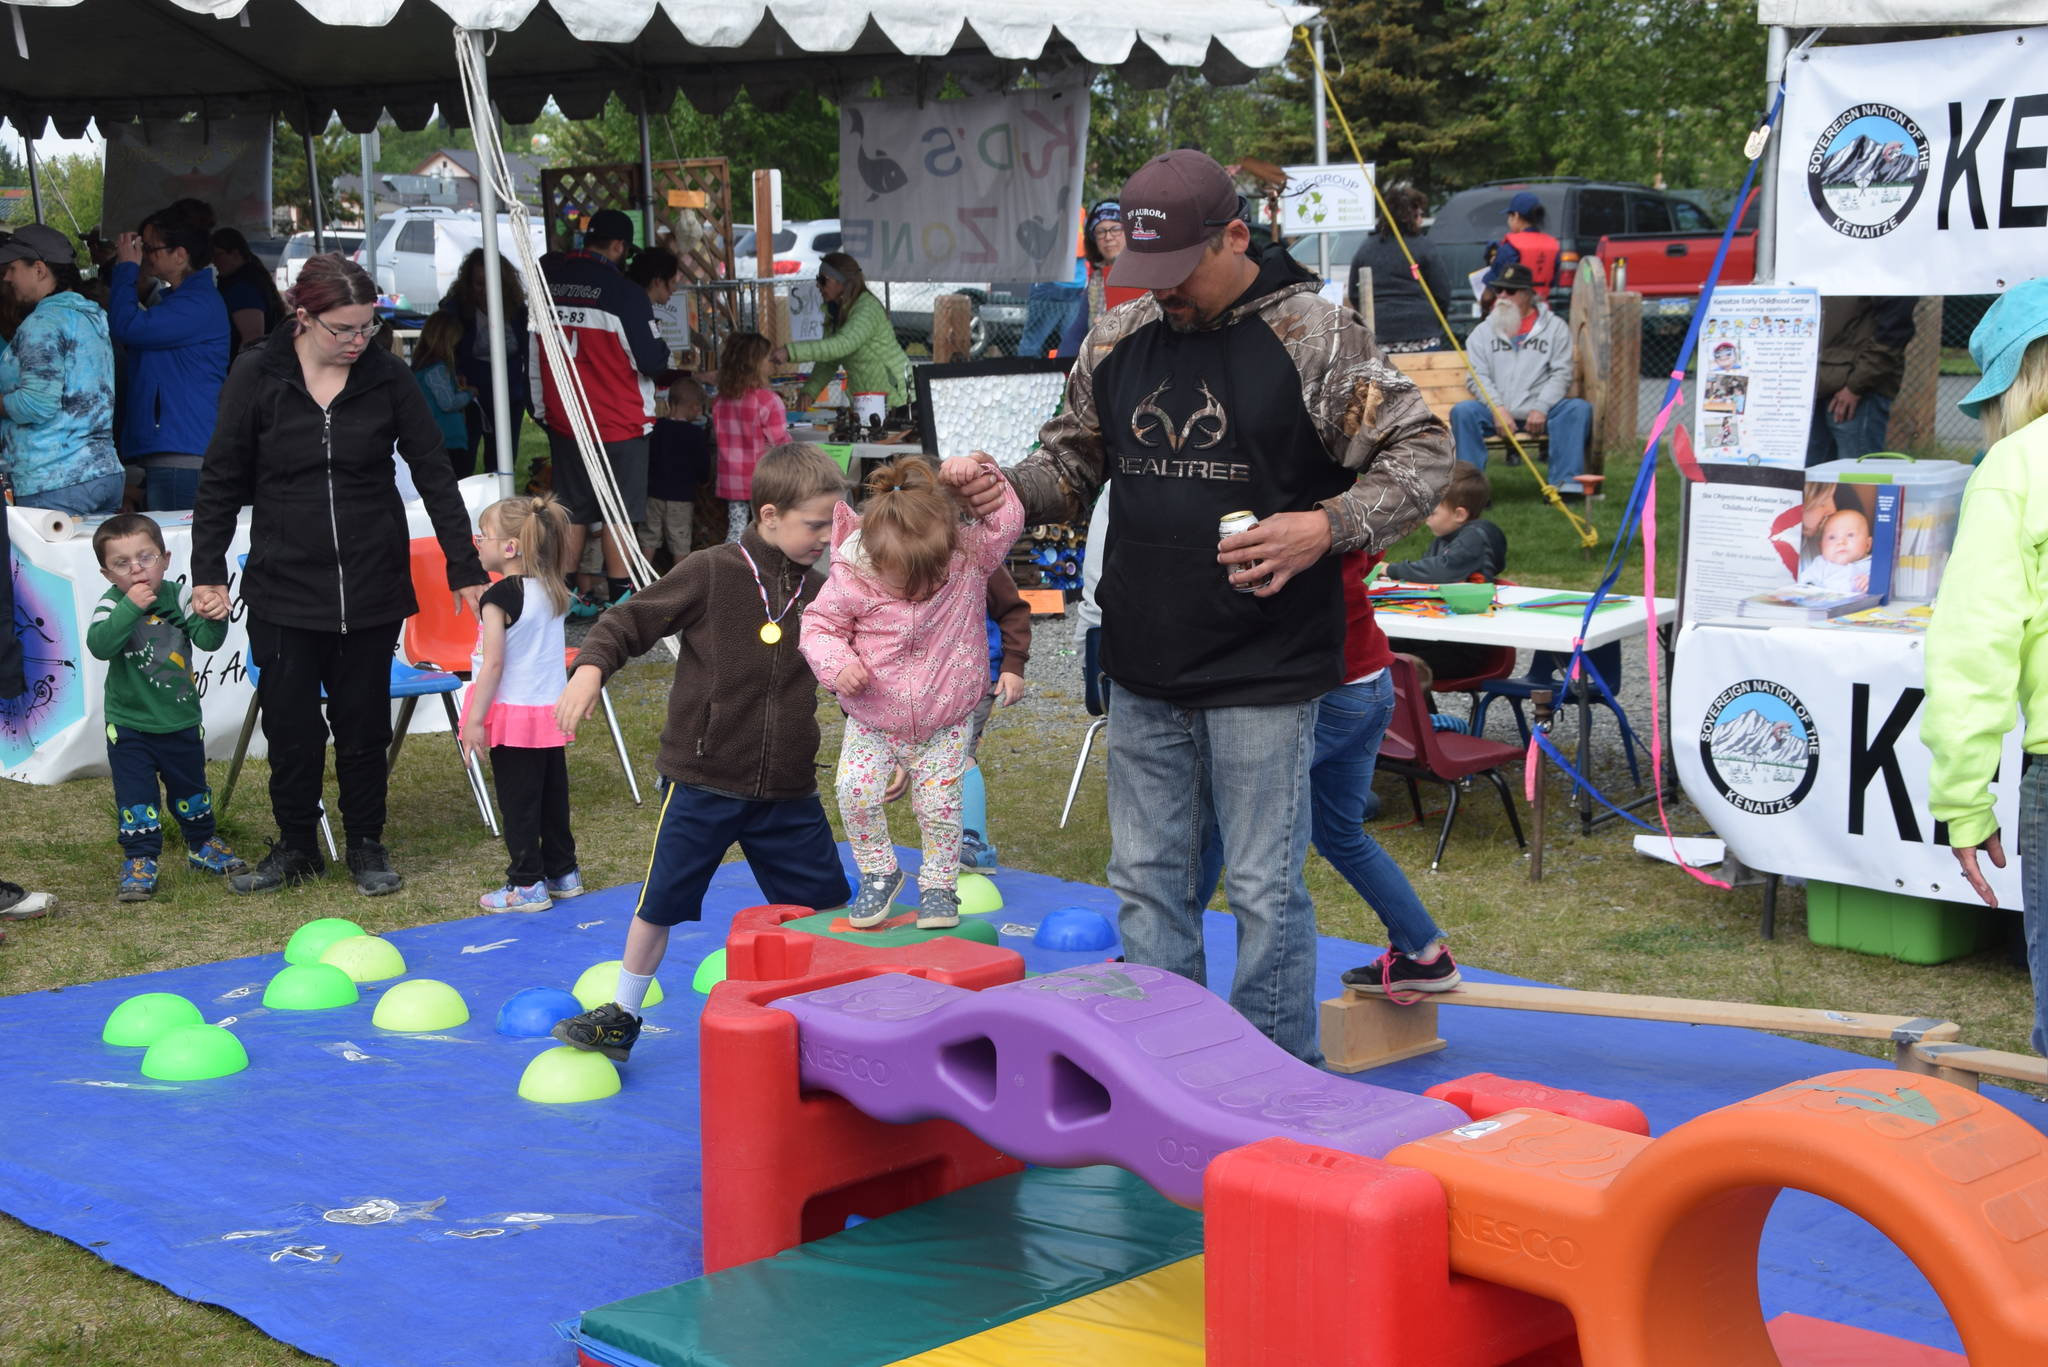 Kids and parents navigate a salmon obstacle course set up by the Kenaitze Early Childhood Center during the Kenai River Festival at Soldotna Creek Park in Soldotna, Alaska on June 8, 2019. (Photo by Brian Mazurek/Peninsula Clarion)